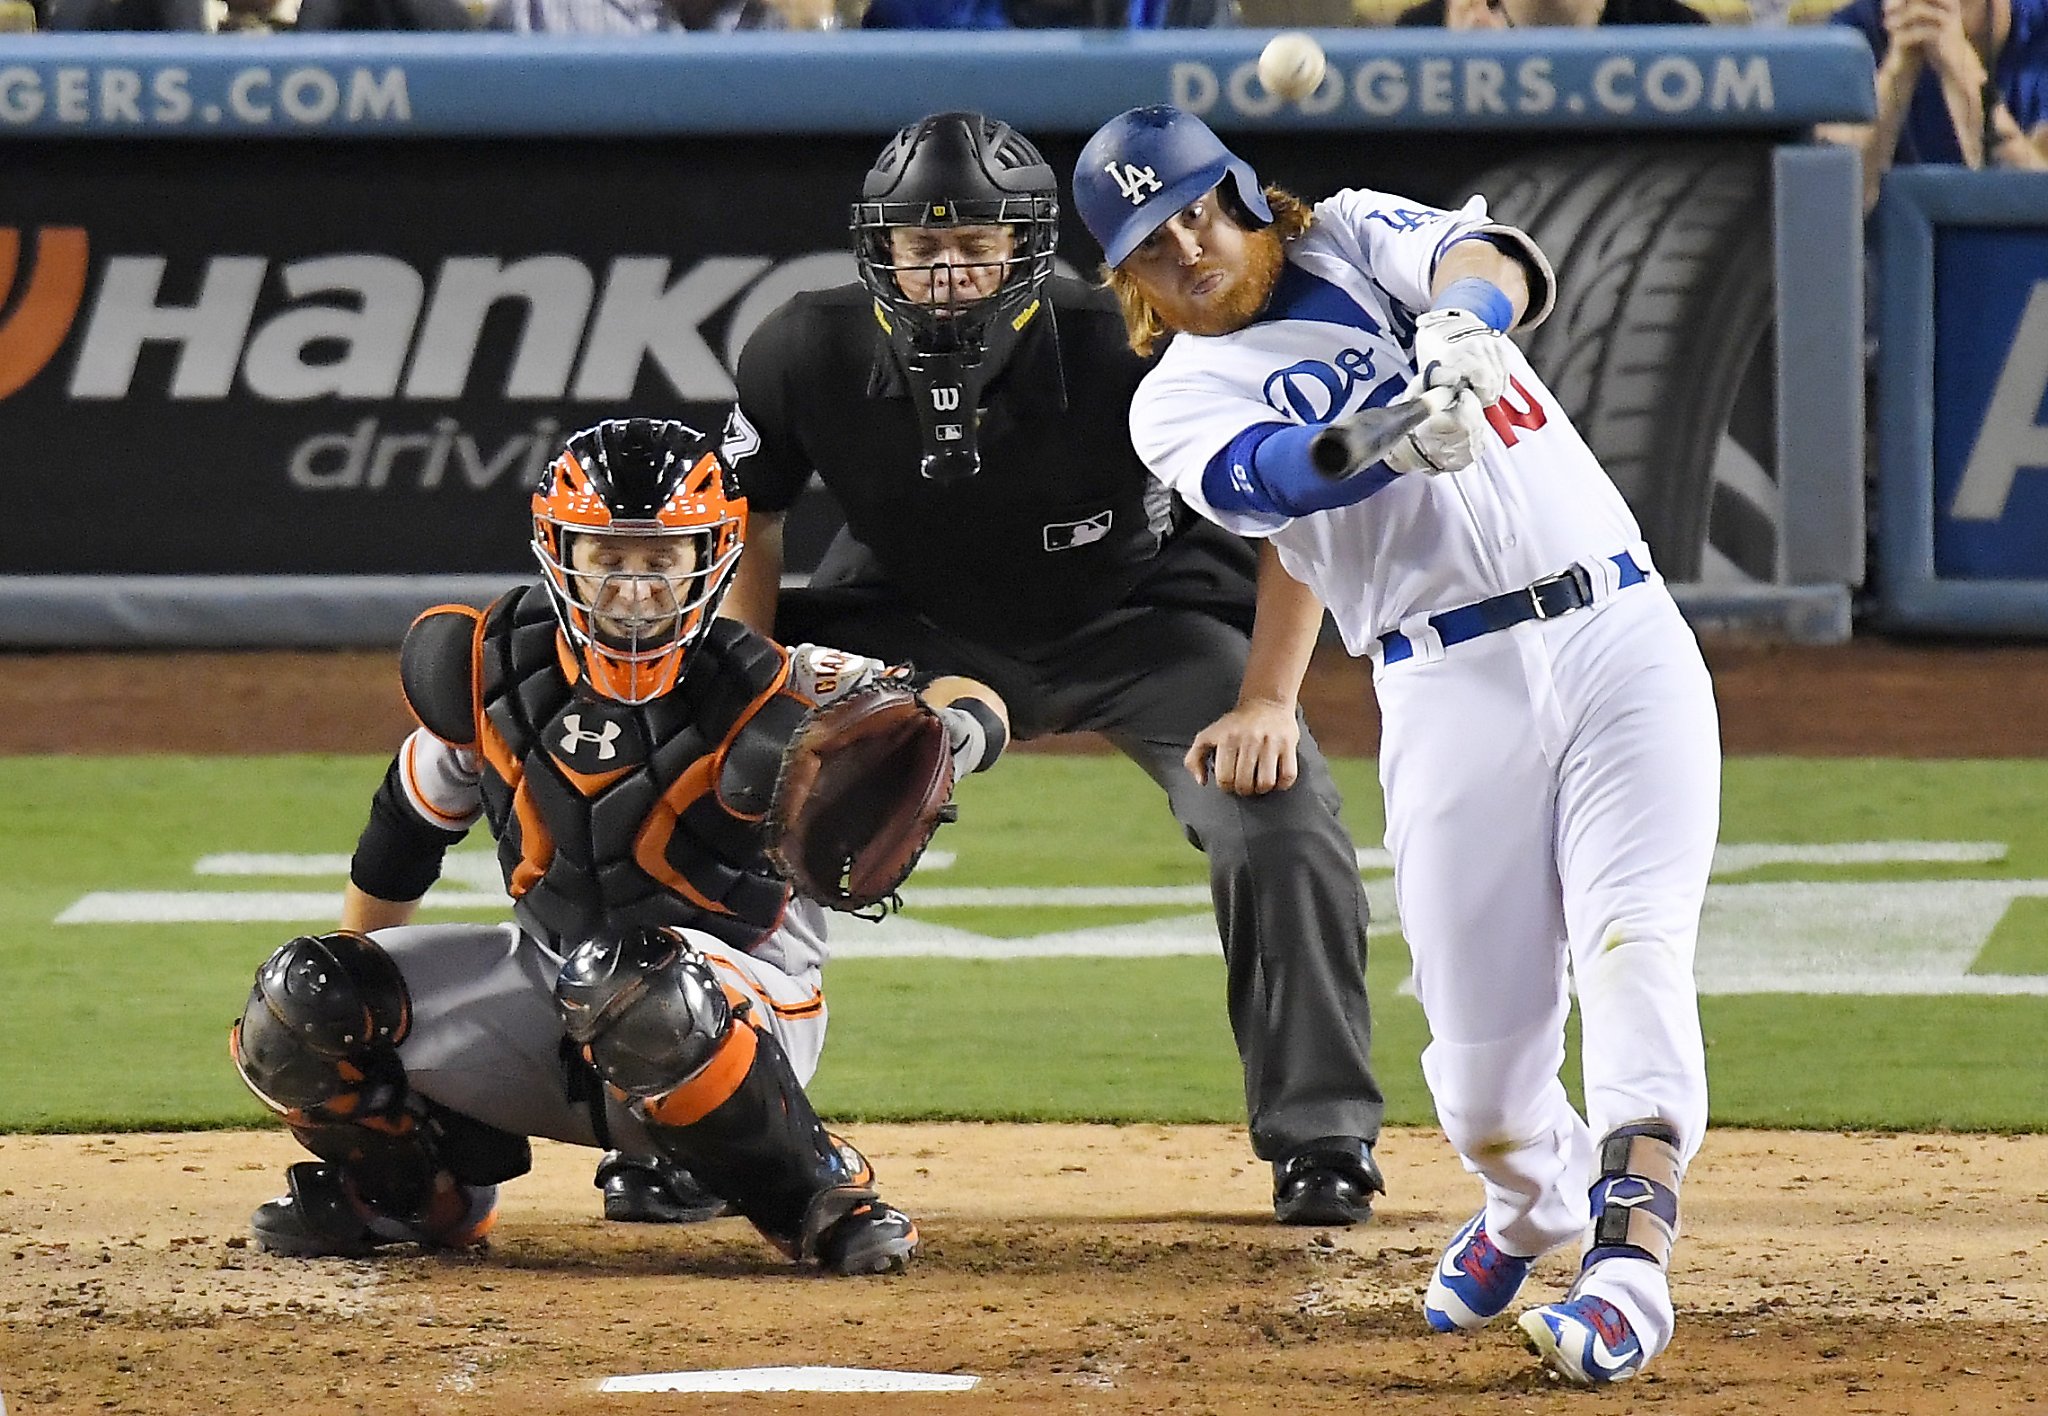 Justin Turner unsettled at idea of not playing for Dodgers - Los